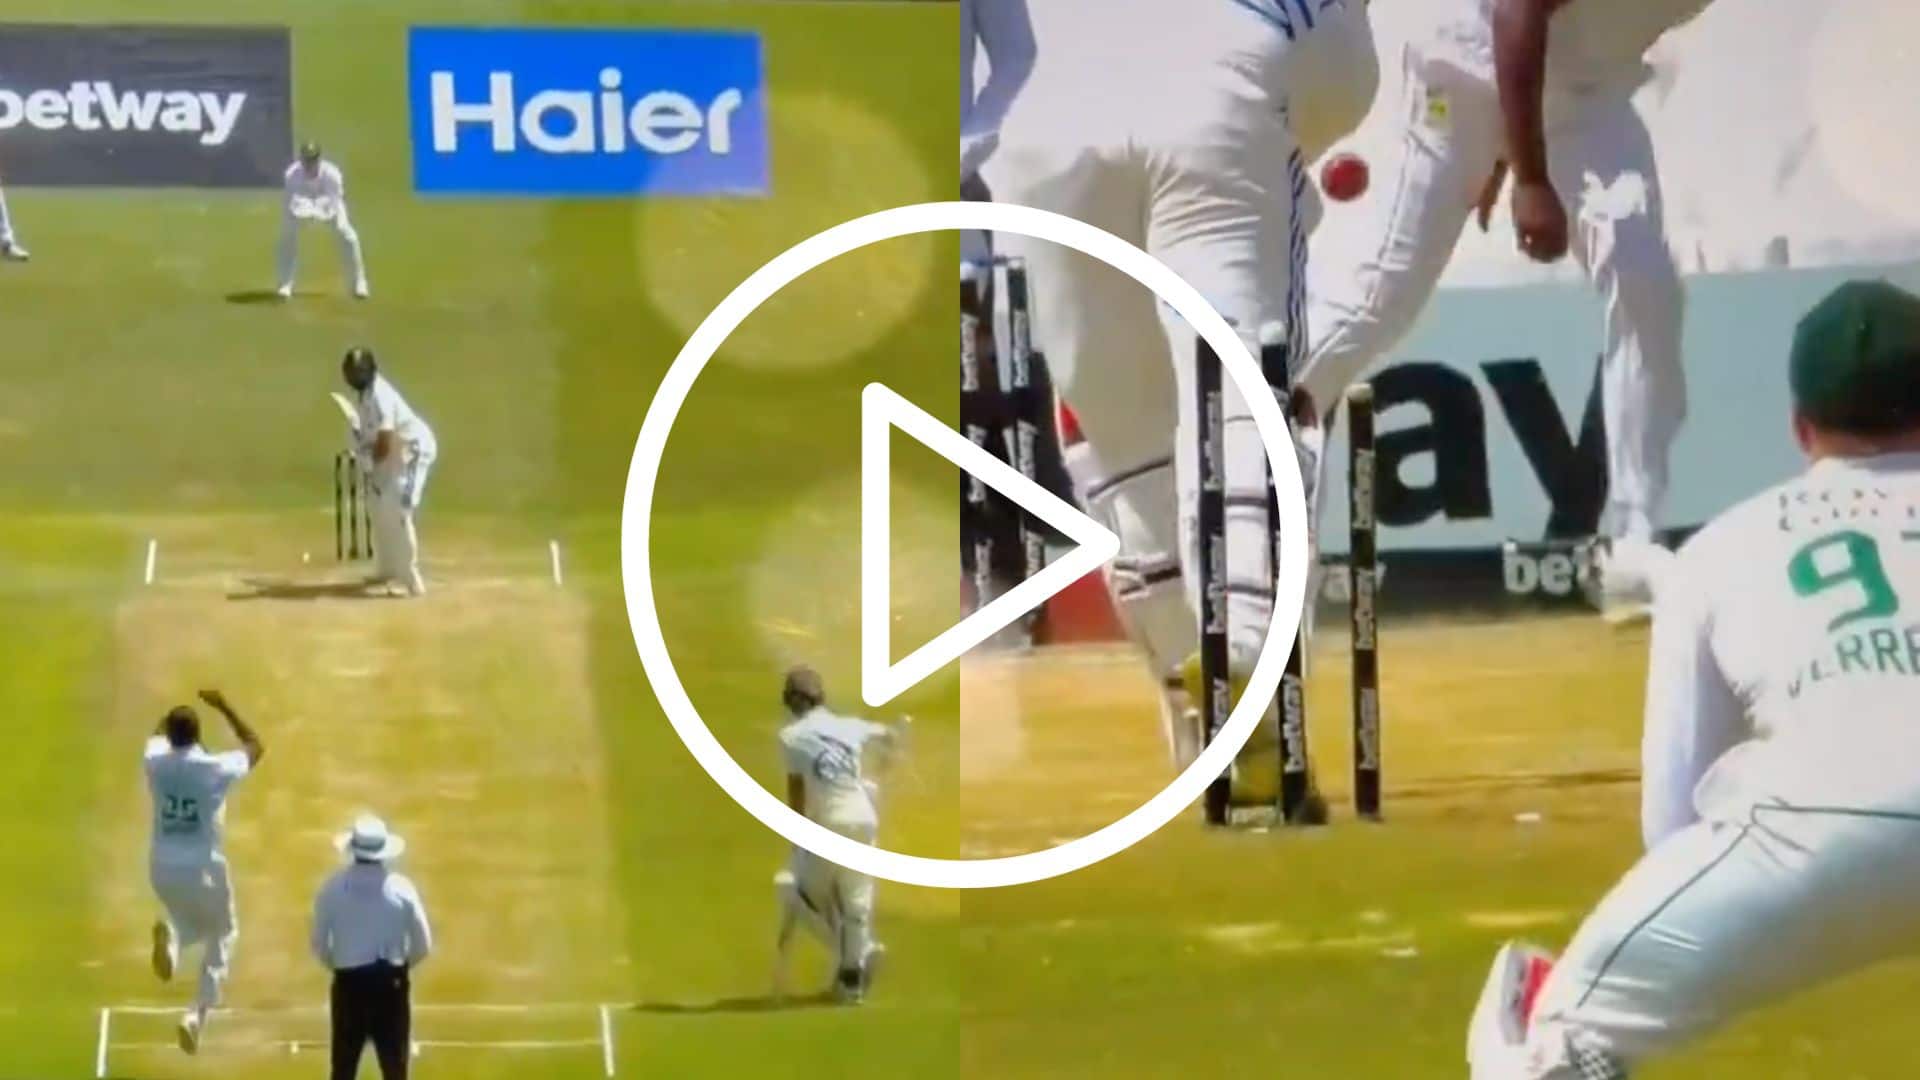 [Watch] Rohit Sharma ‘Down And Out’ For Duck As Kagiso Rabada Delivers A Peach